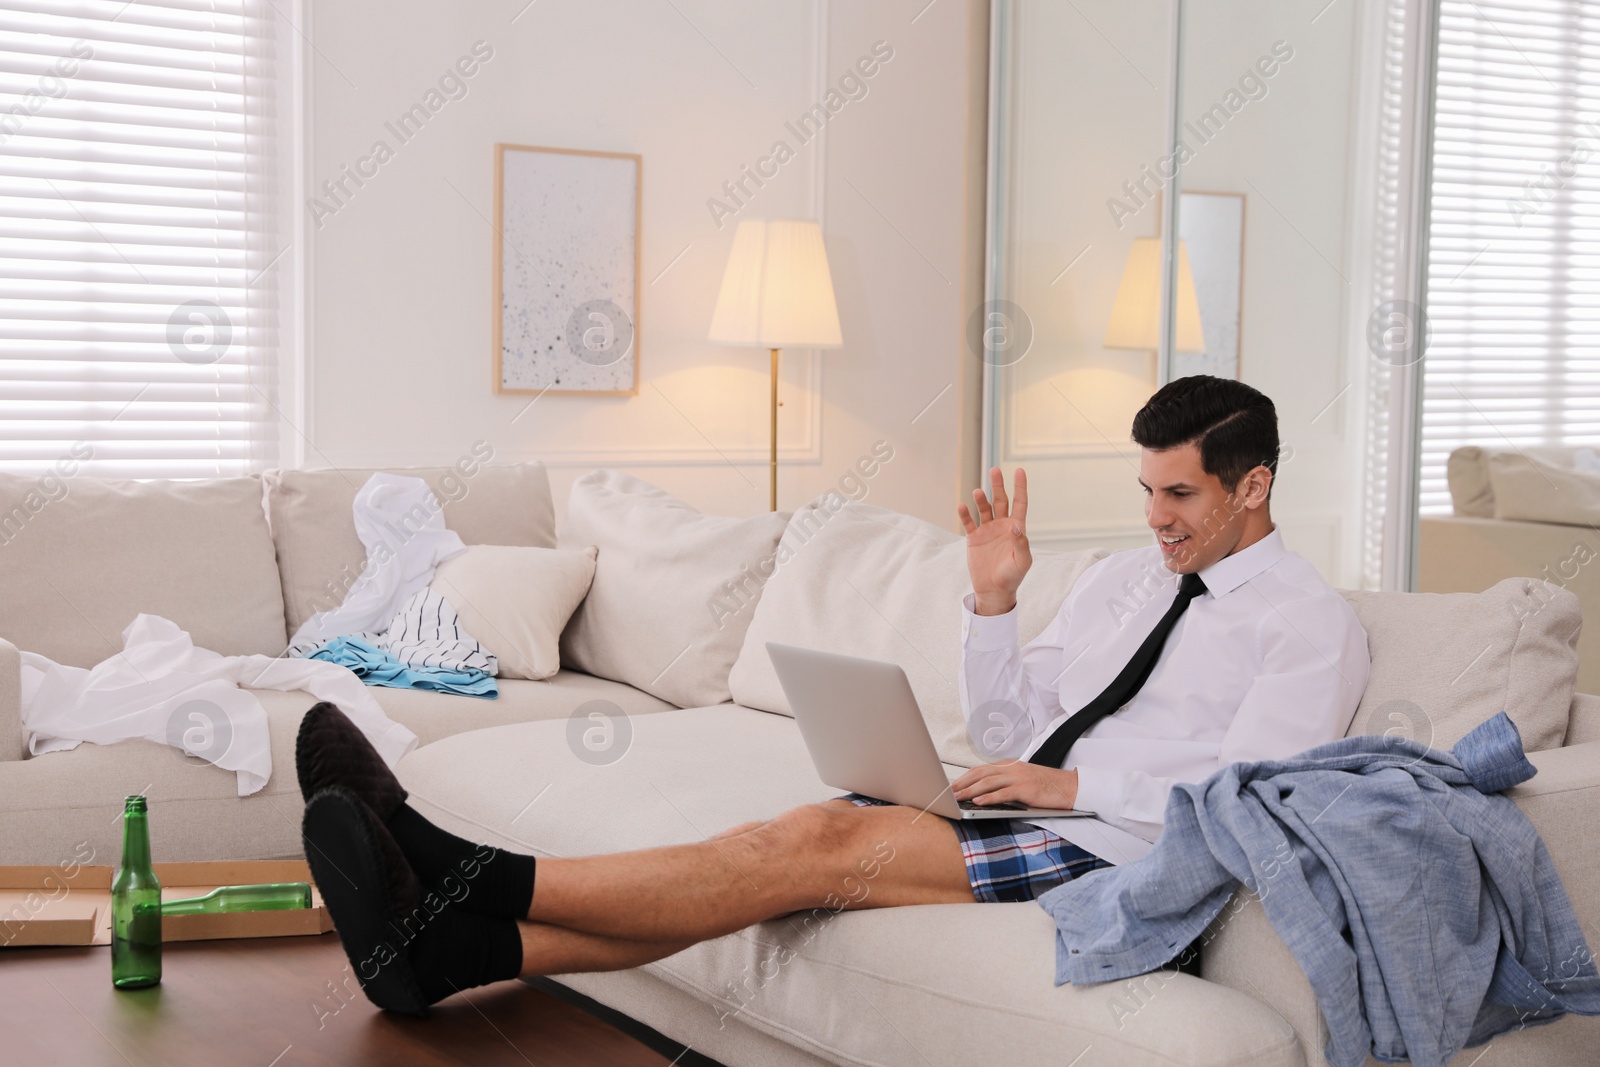 Photo of Man working on laptop in messy room. Stay at home concept